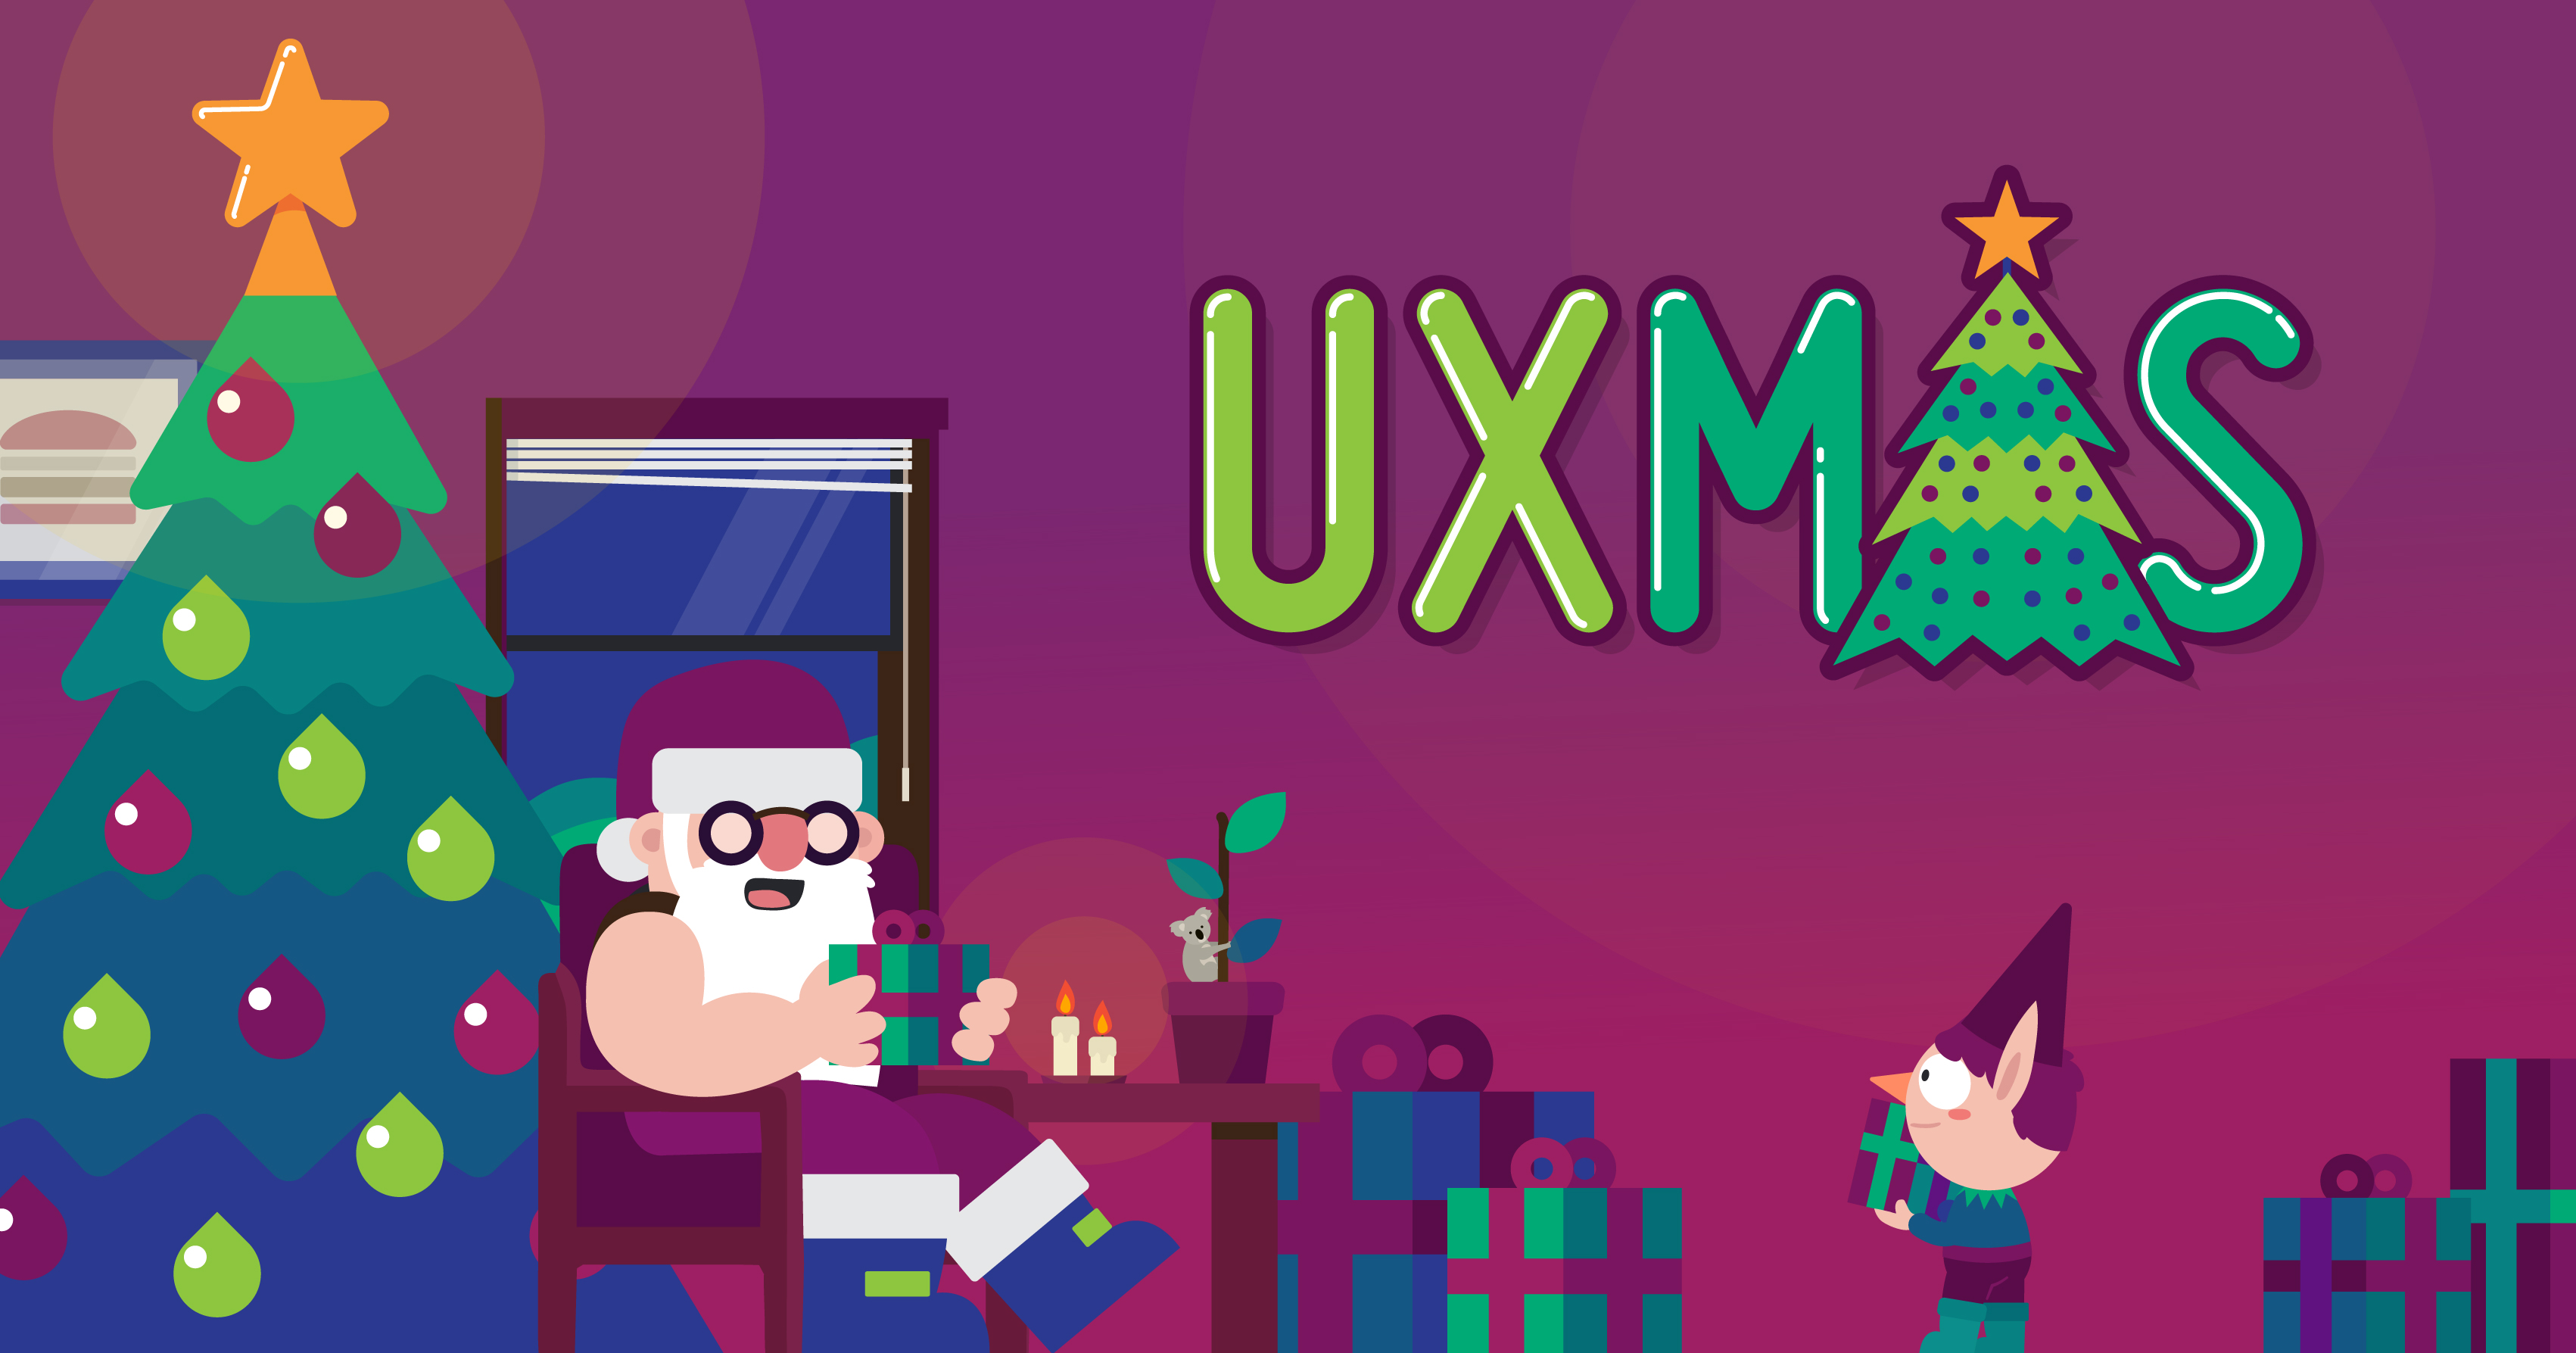 Pricing page example #503: UXmas - An advent calendar for UX folk!